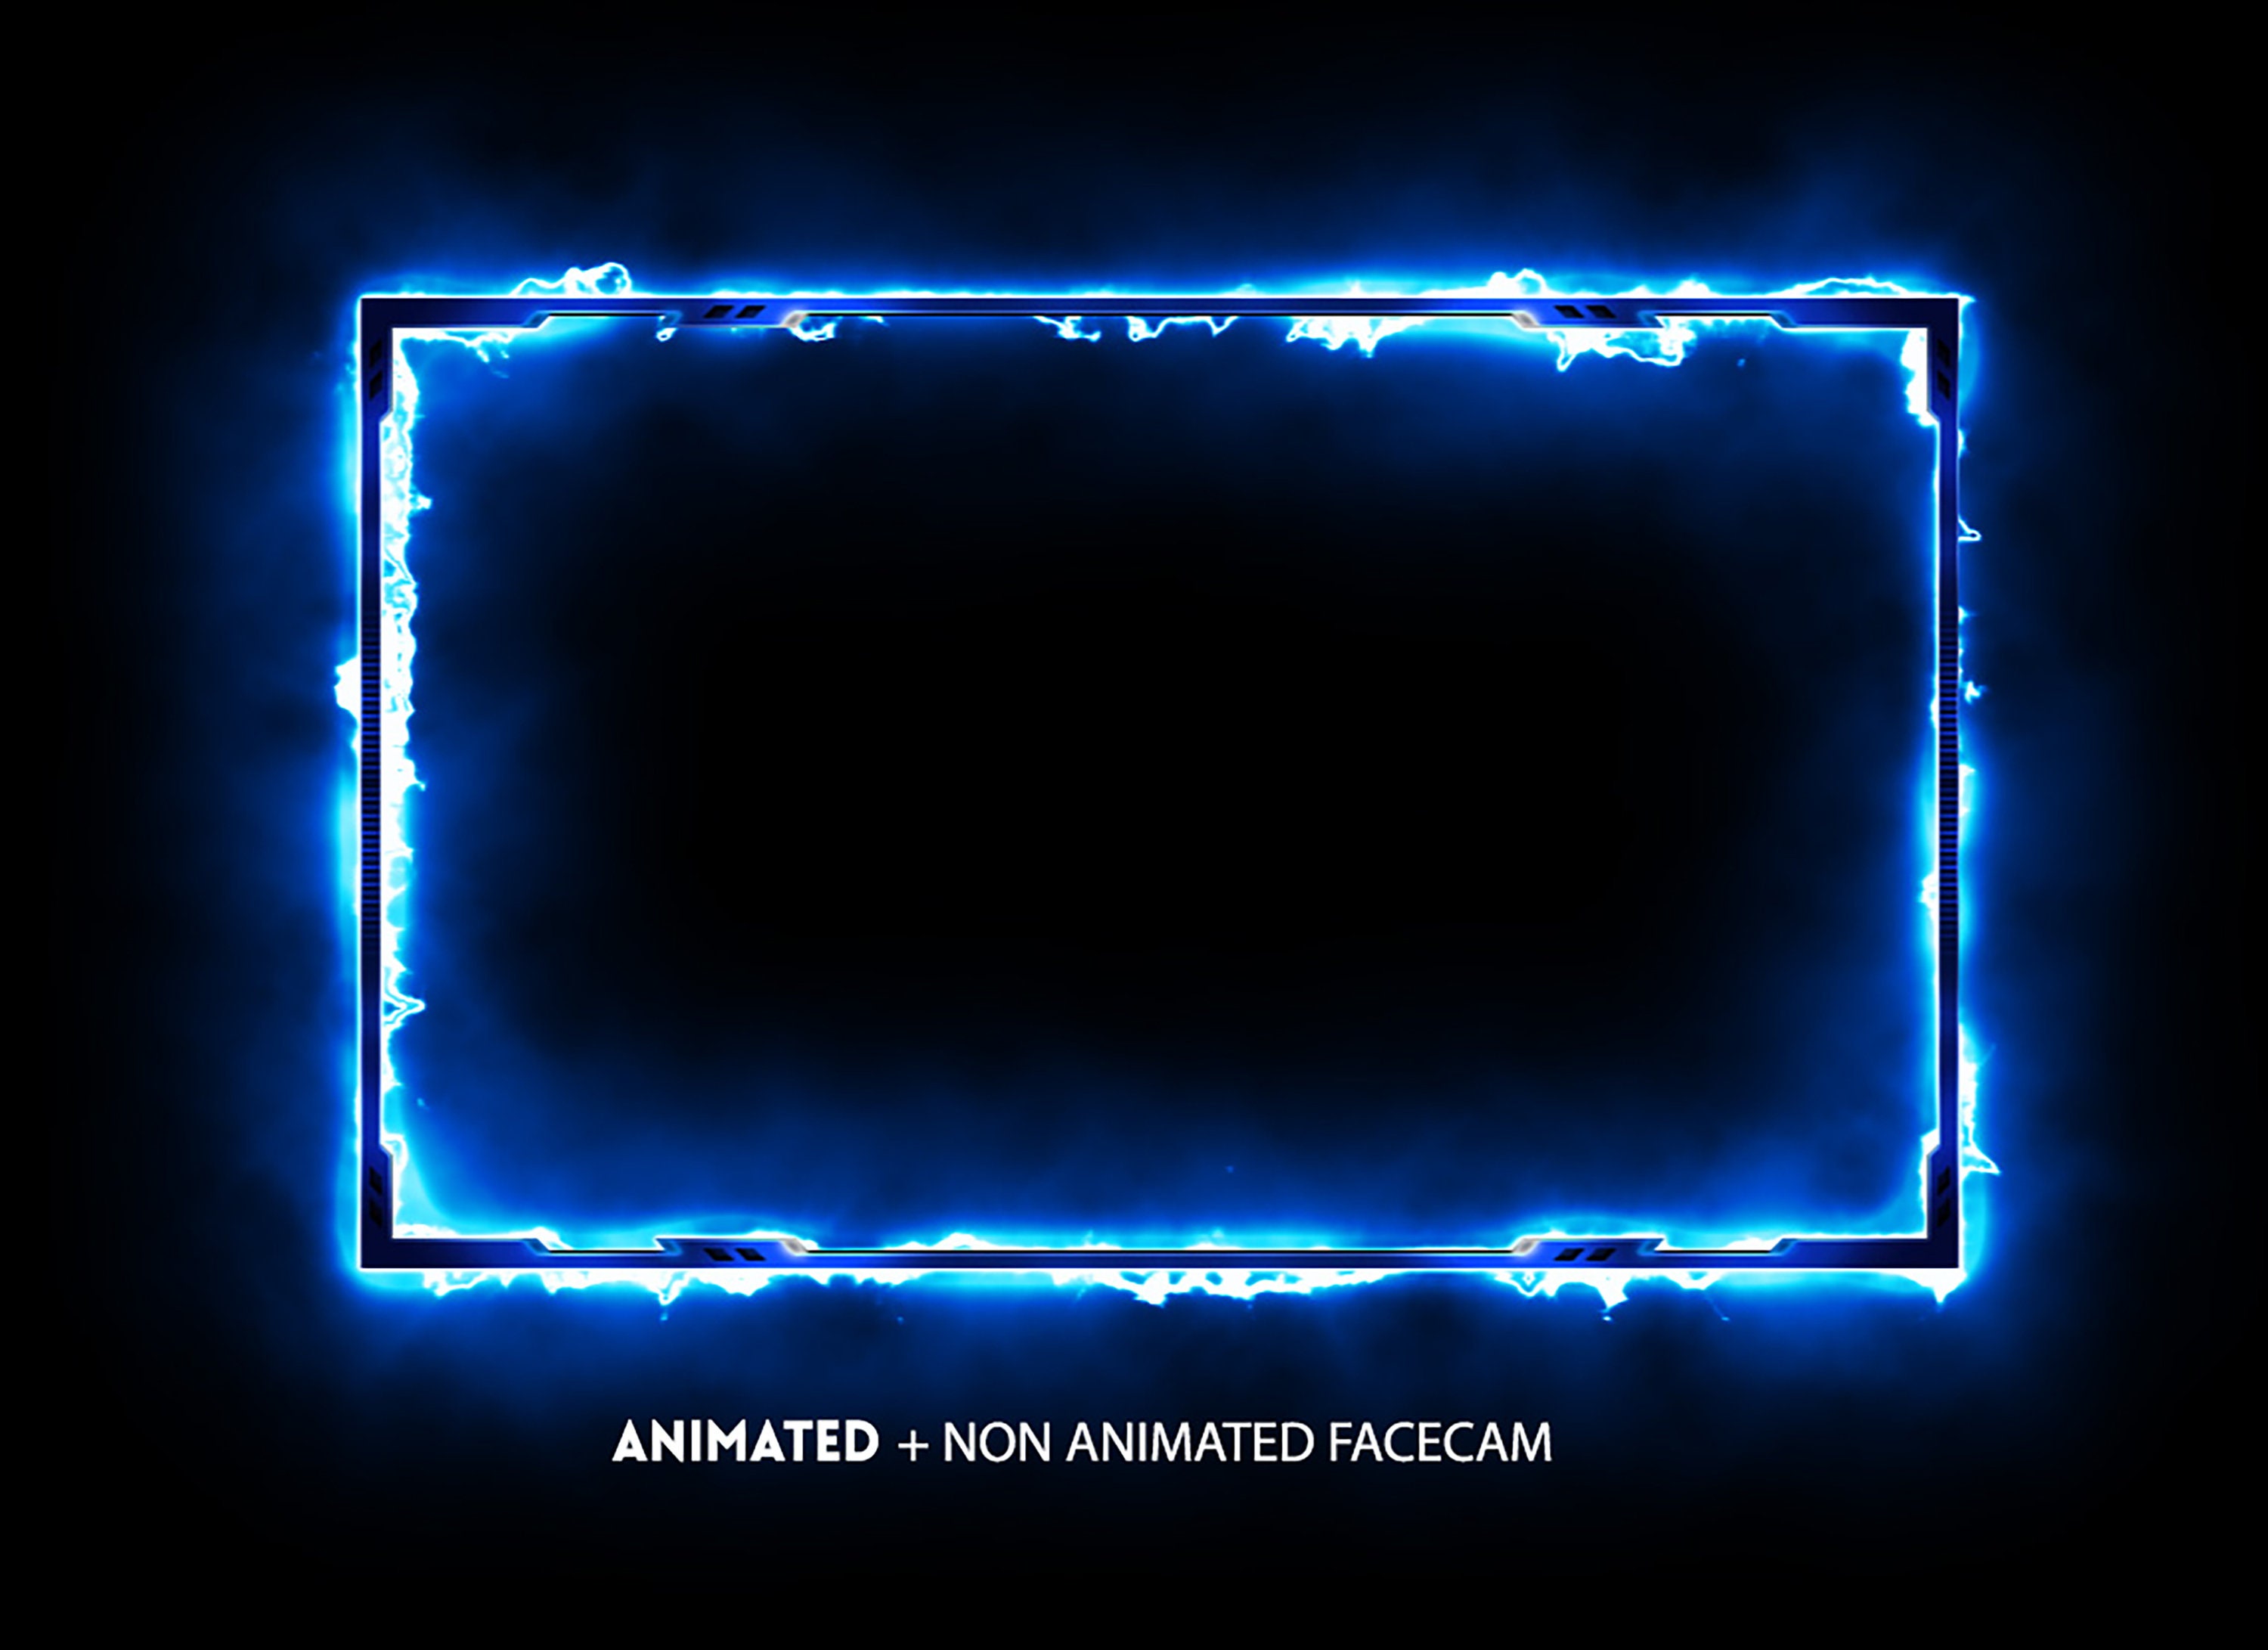 Twitch Overlay Animated Webcam Facecam Gamecam Overlay - Etsy 04D